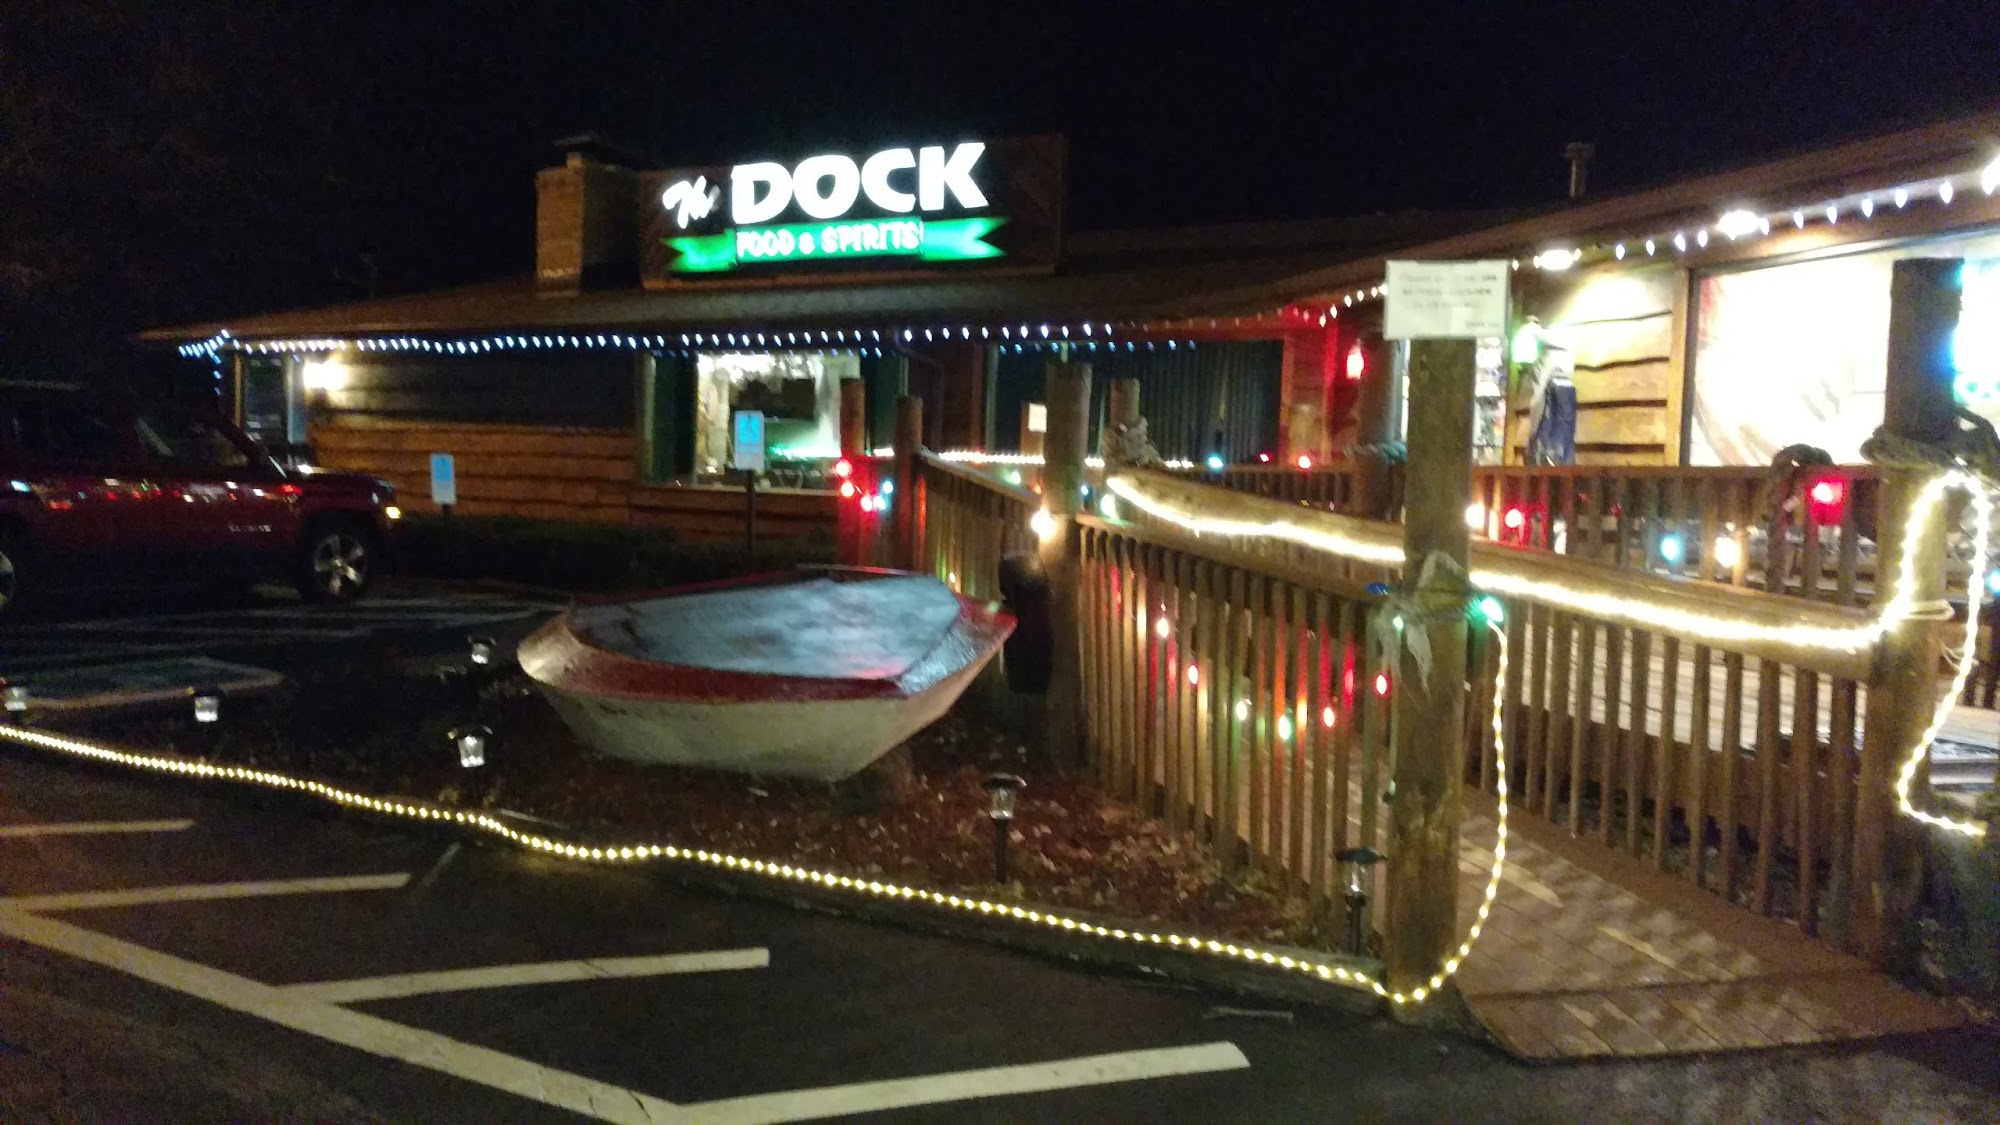 The Dock Food and Spirits